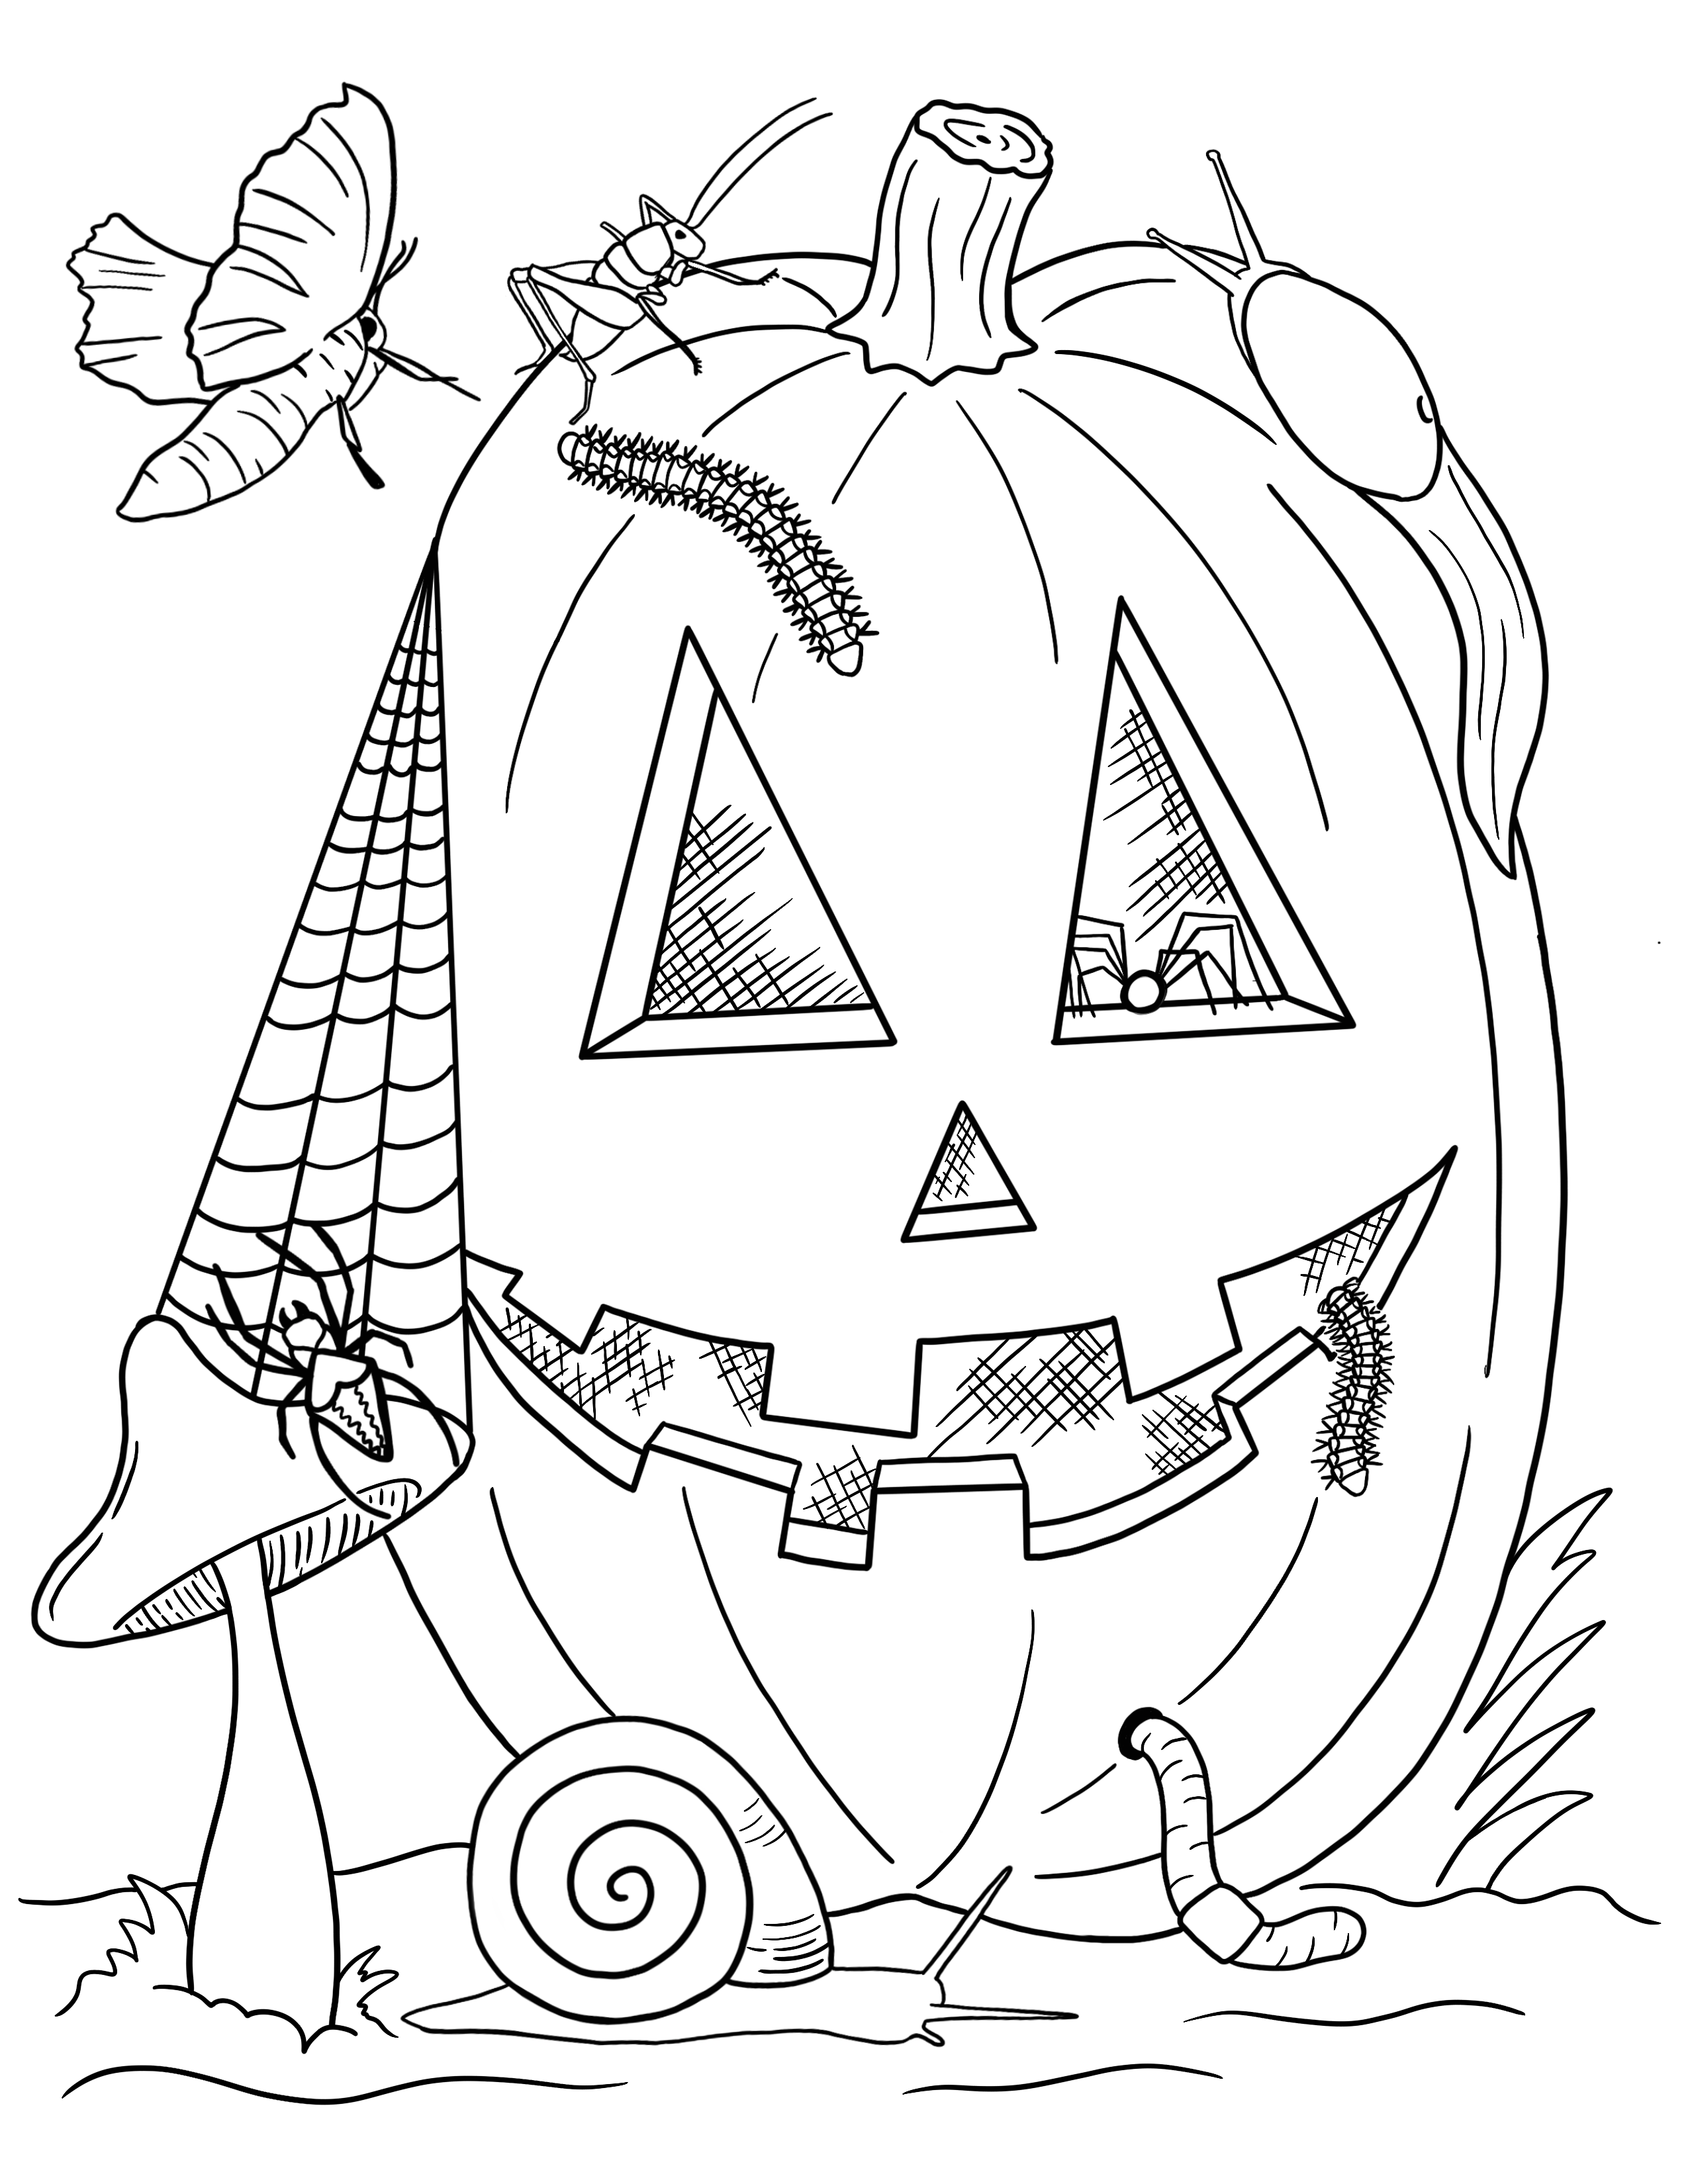 A black and white cartoon of a carved jack-o-lantern. A mushroom to the left connects the pumpkin with a spider web. A moth flies to the upper left. A cricket and banana slug slither at the top of the pumpkin. A worm comes out of the base.